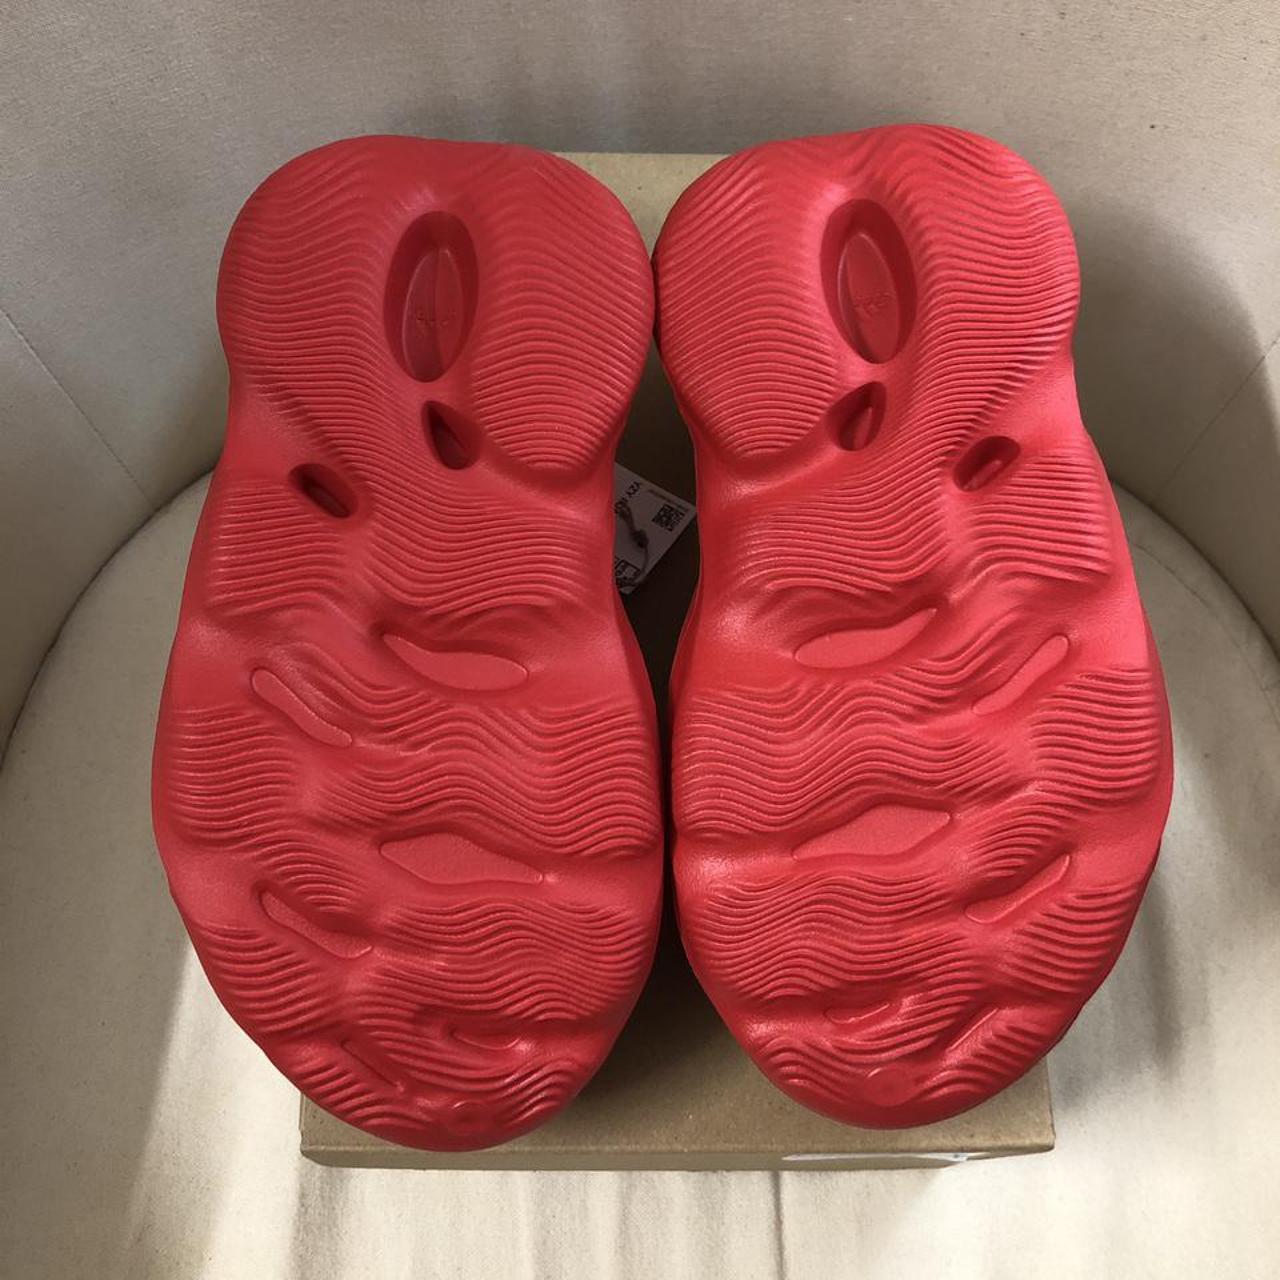 Product Image 2 - Adidas Foam runner Slippers Red